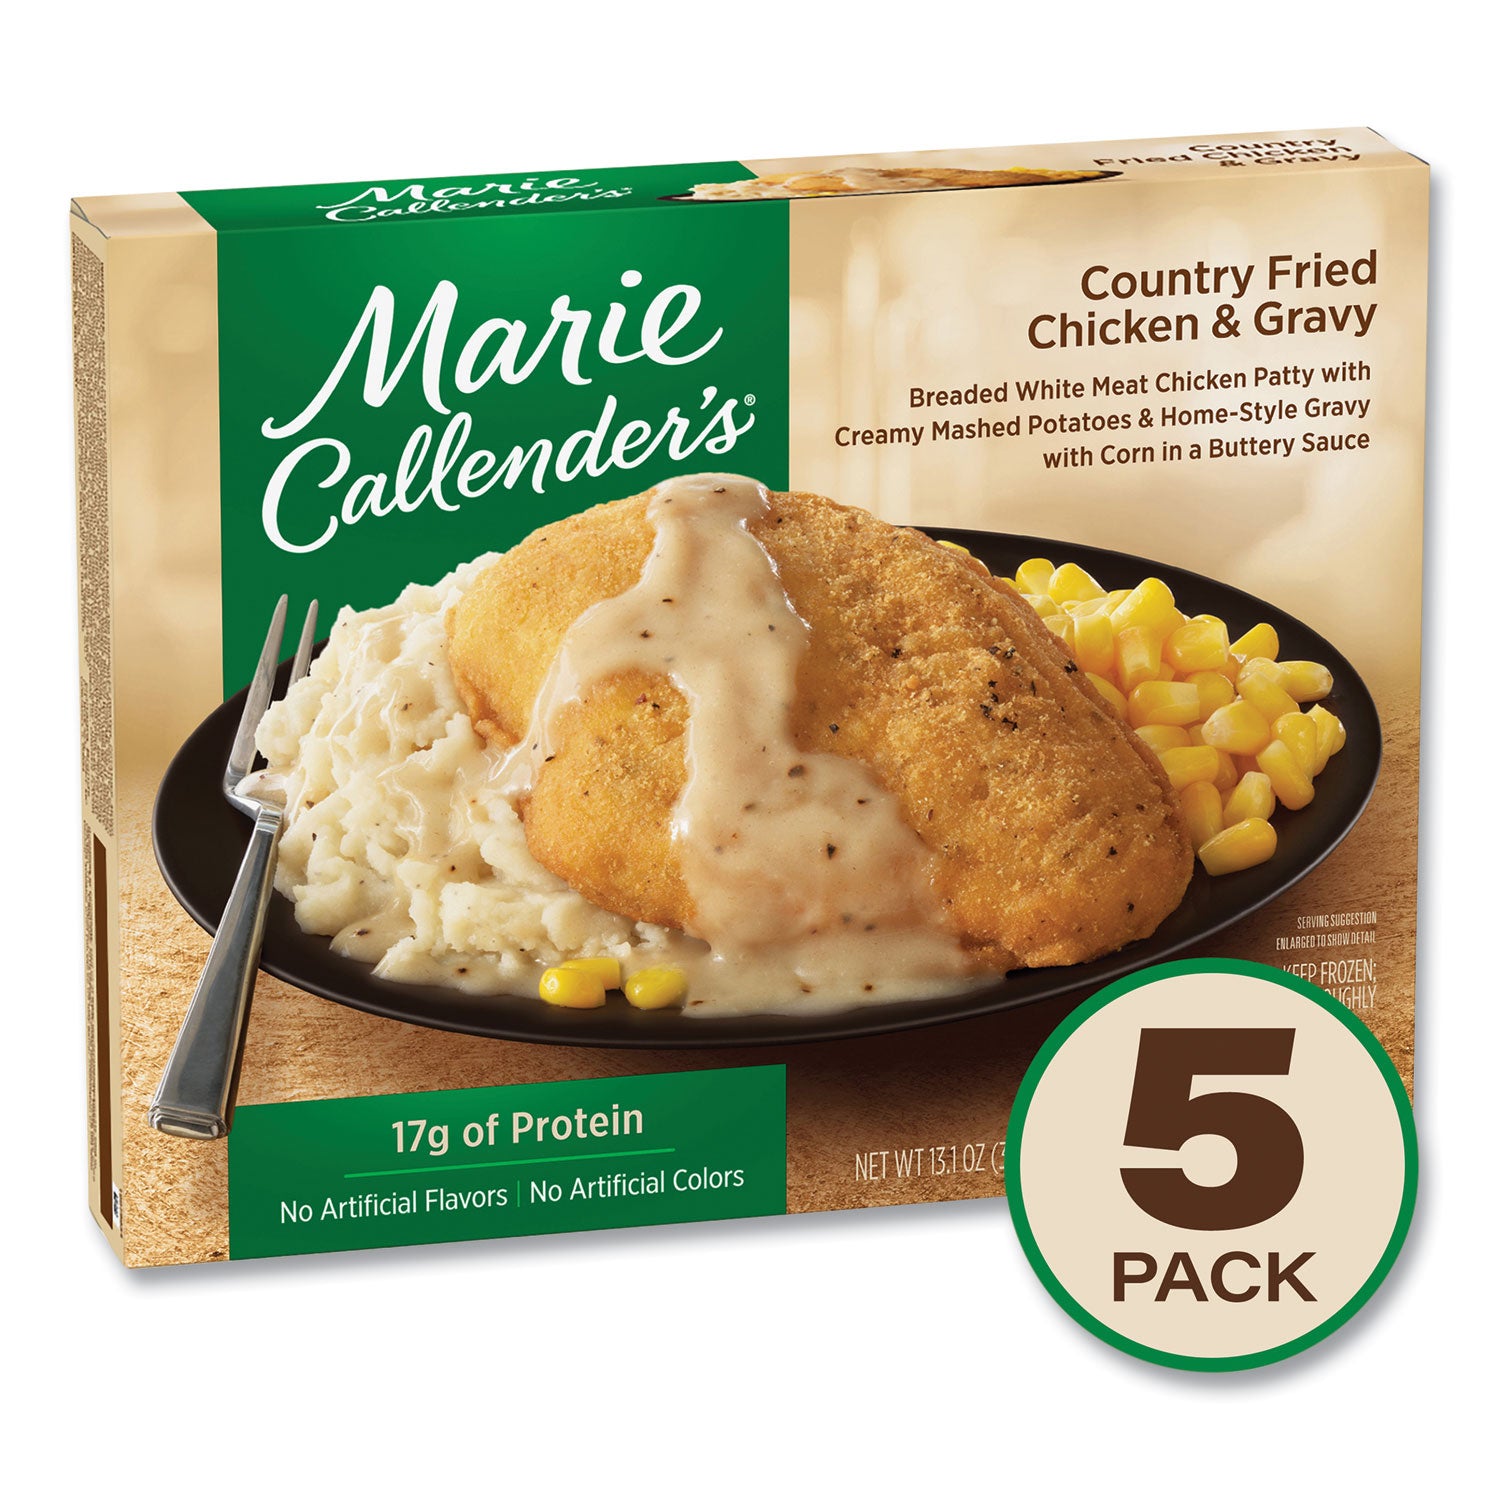 country-fried-chicken-and-gravy-131-oz-bowl-5-pack-ships-in-1-3-business-days_grr90300169 - 1